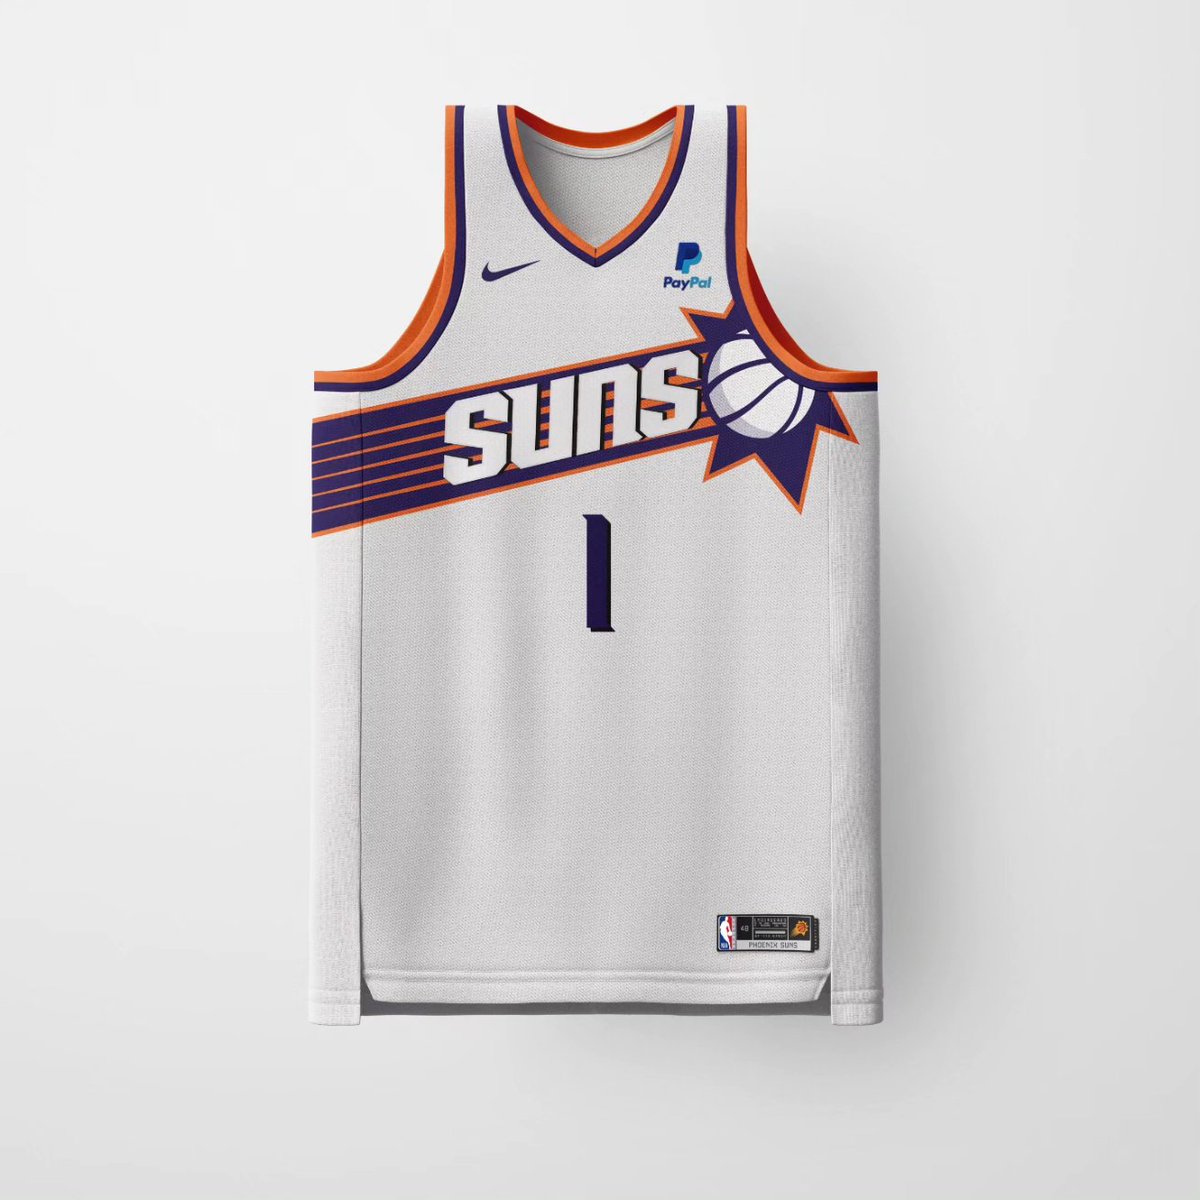 Suns Uniform Tracker on X: BREAKING: NEW PHOTOS OF SUNS POTENTIAL NEW  JERSEYS FOR NEXT SEASON I've been hearing for a bit that these are back on  the table, and these photos